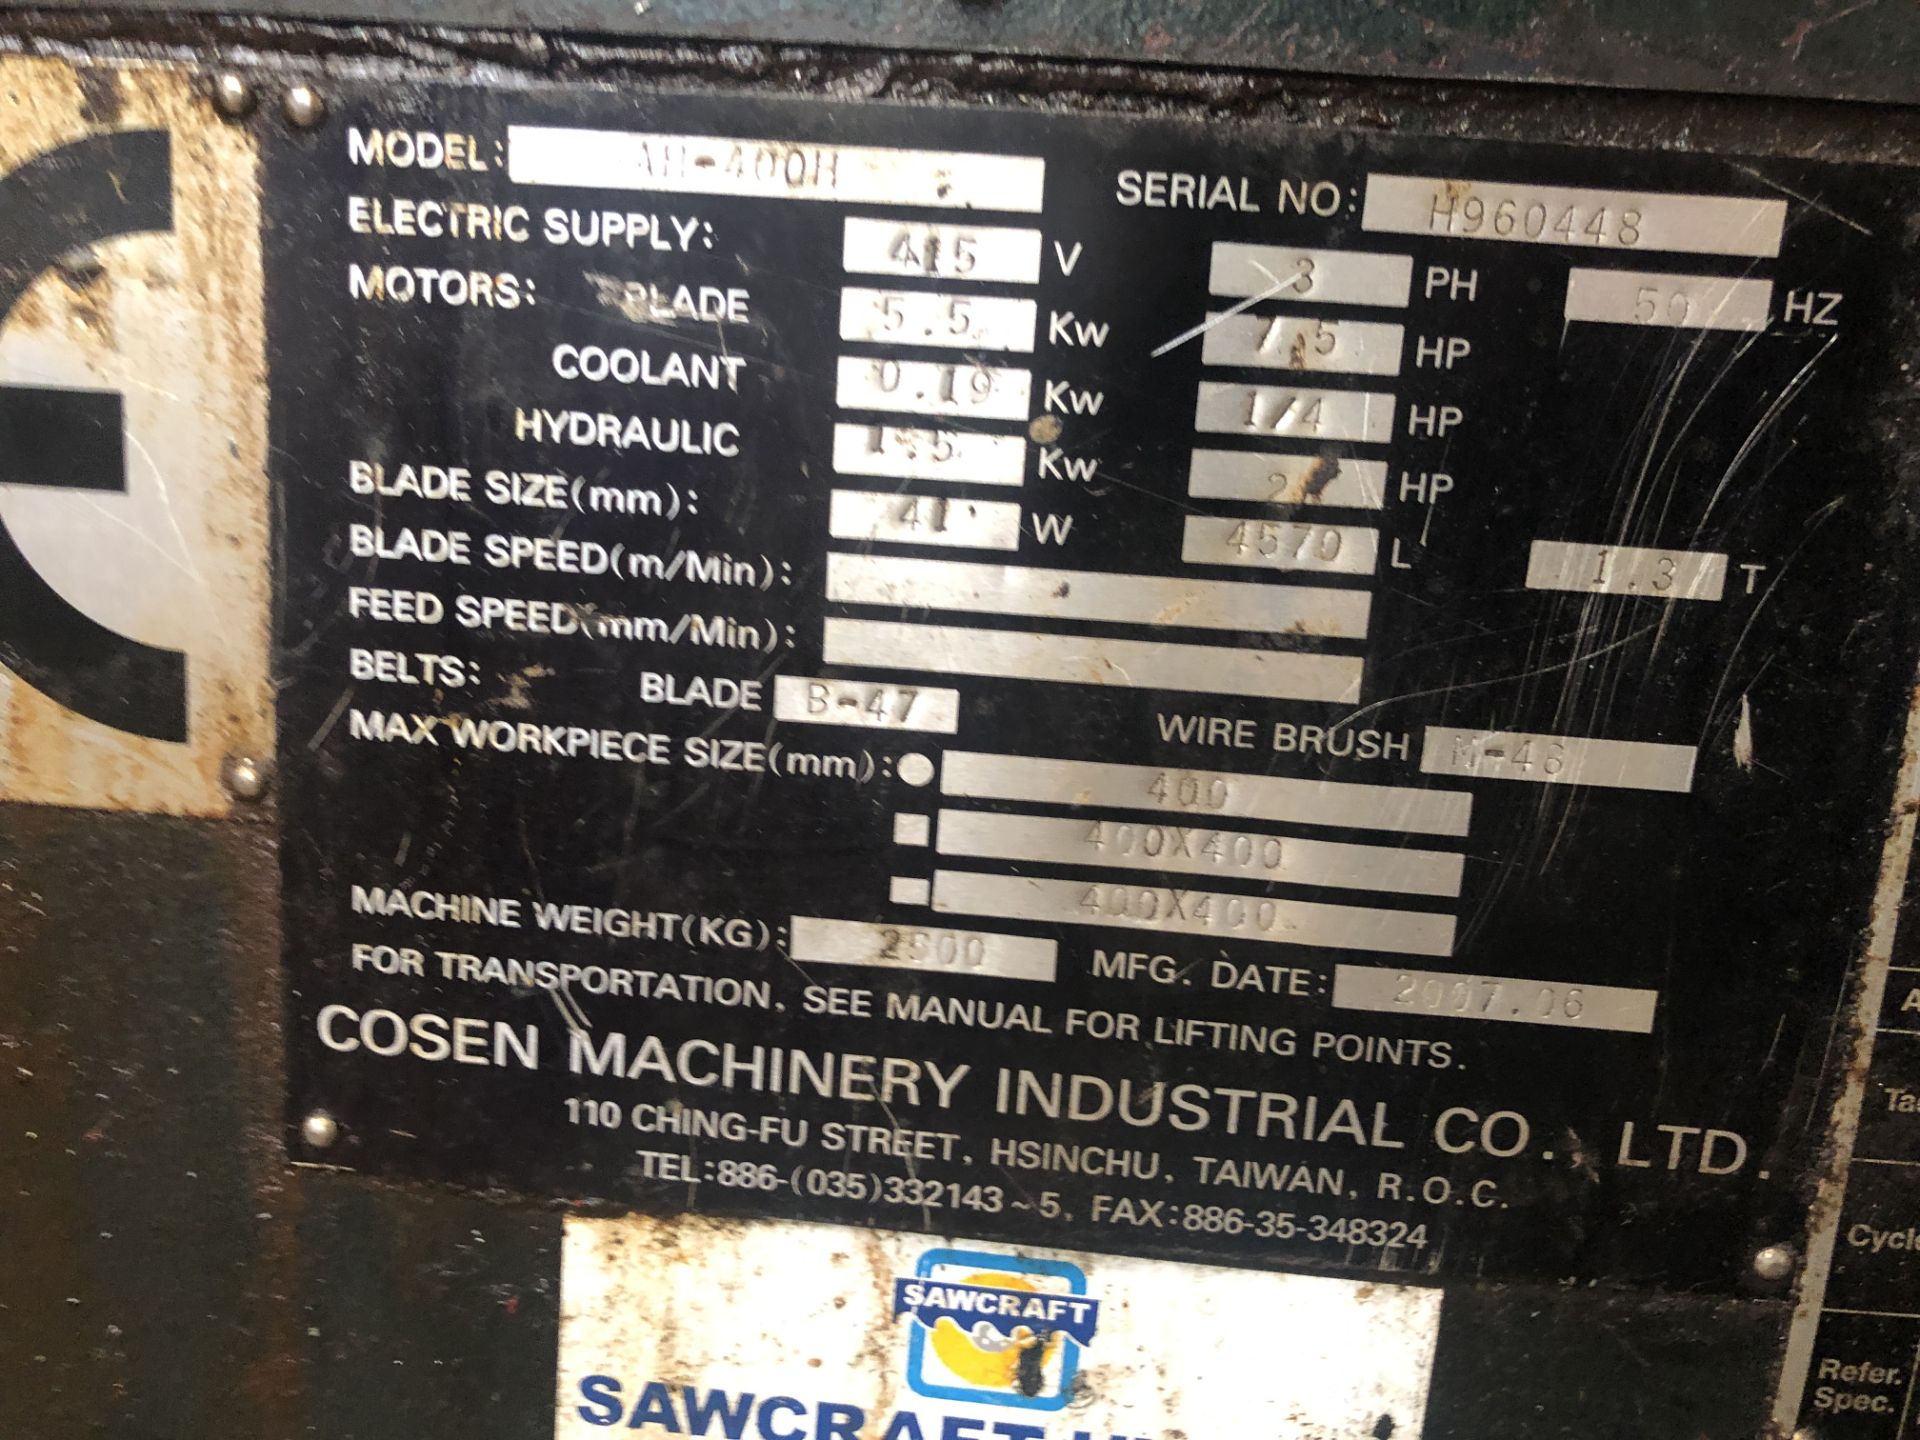 Cosen Machinery Industrial Co, Model AH-400H, Horizontal Bandsaw, Serial No. H960448 (07/2006) - Image 3 of 12